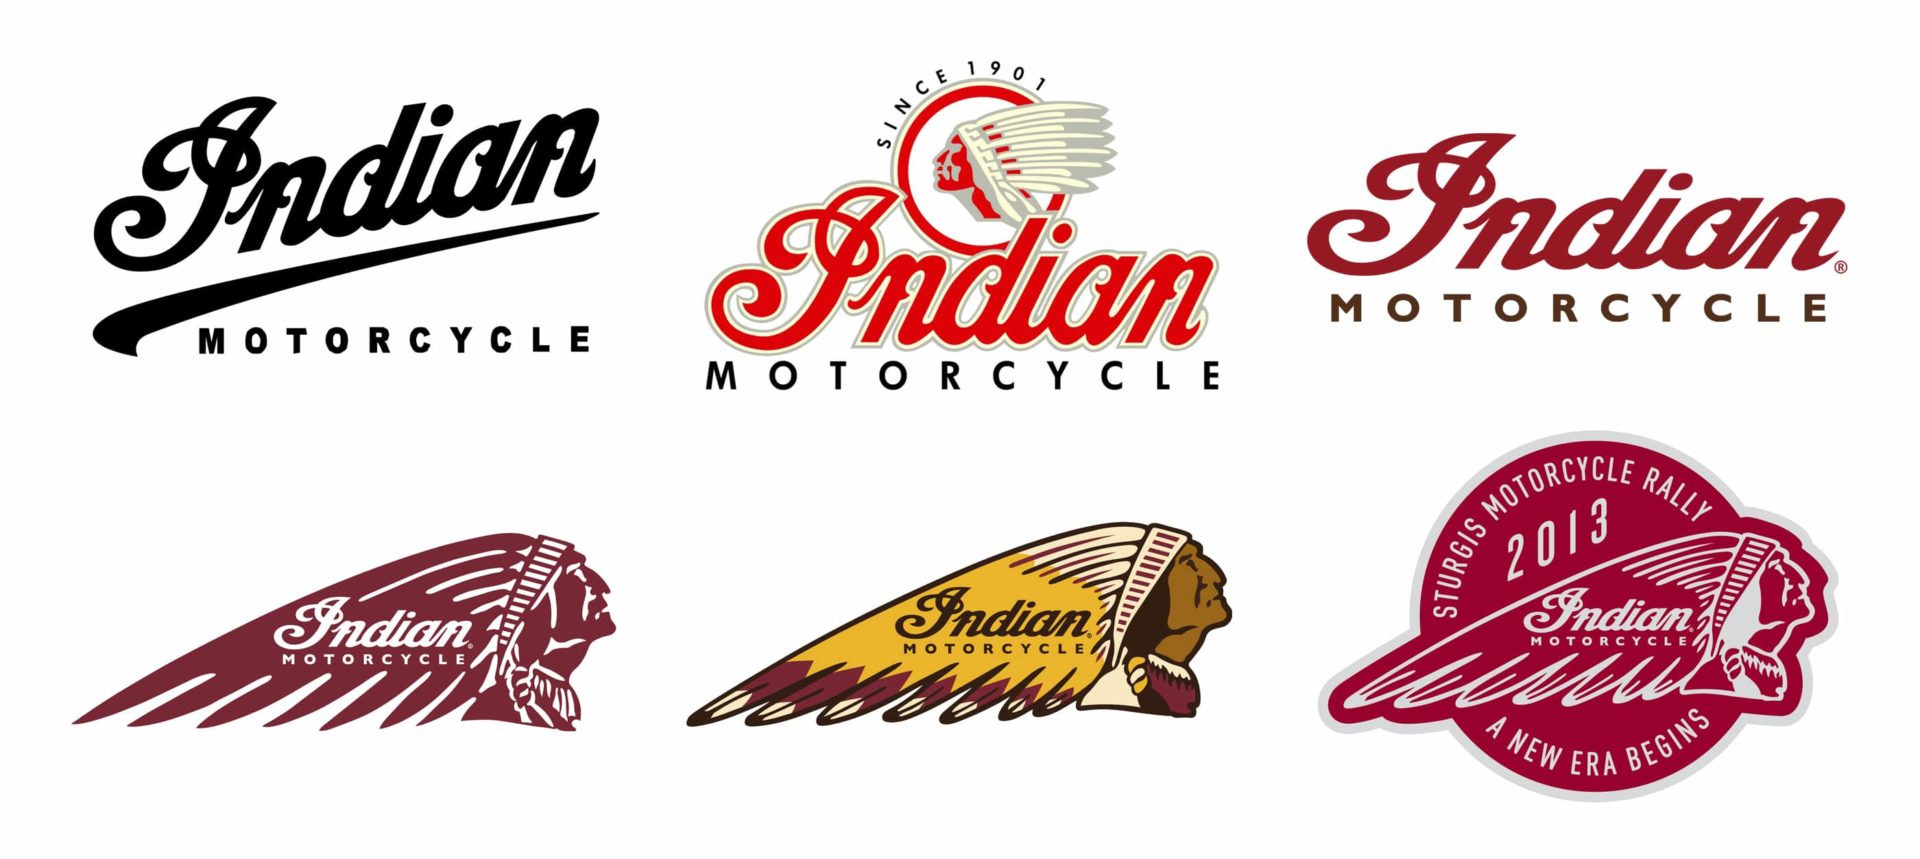 Indian motorcycle logo history and Meaning, bike emblem